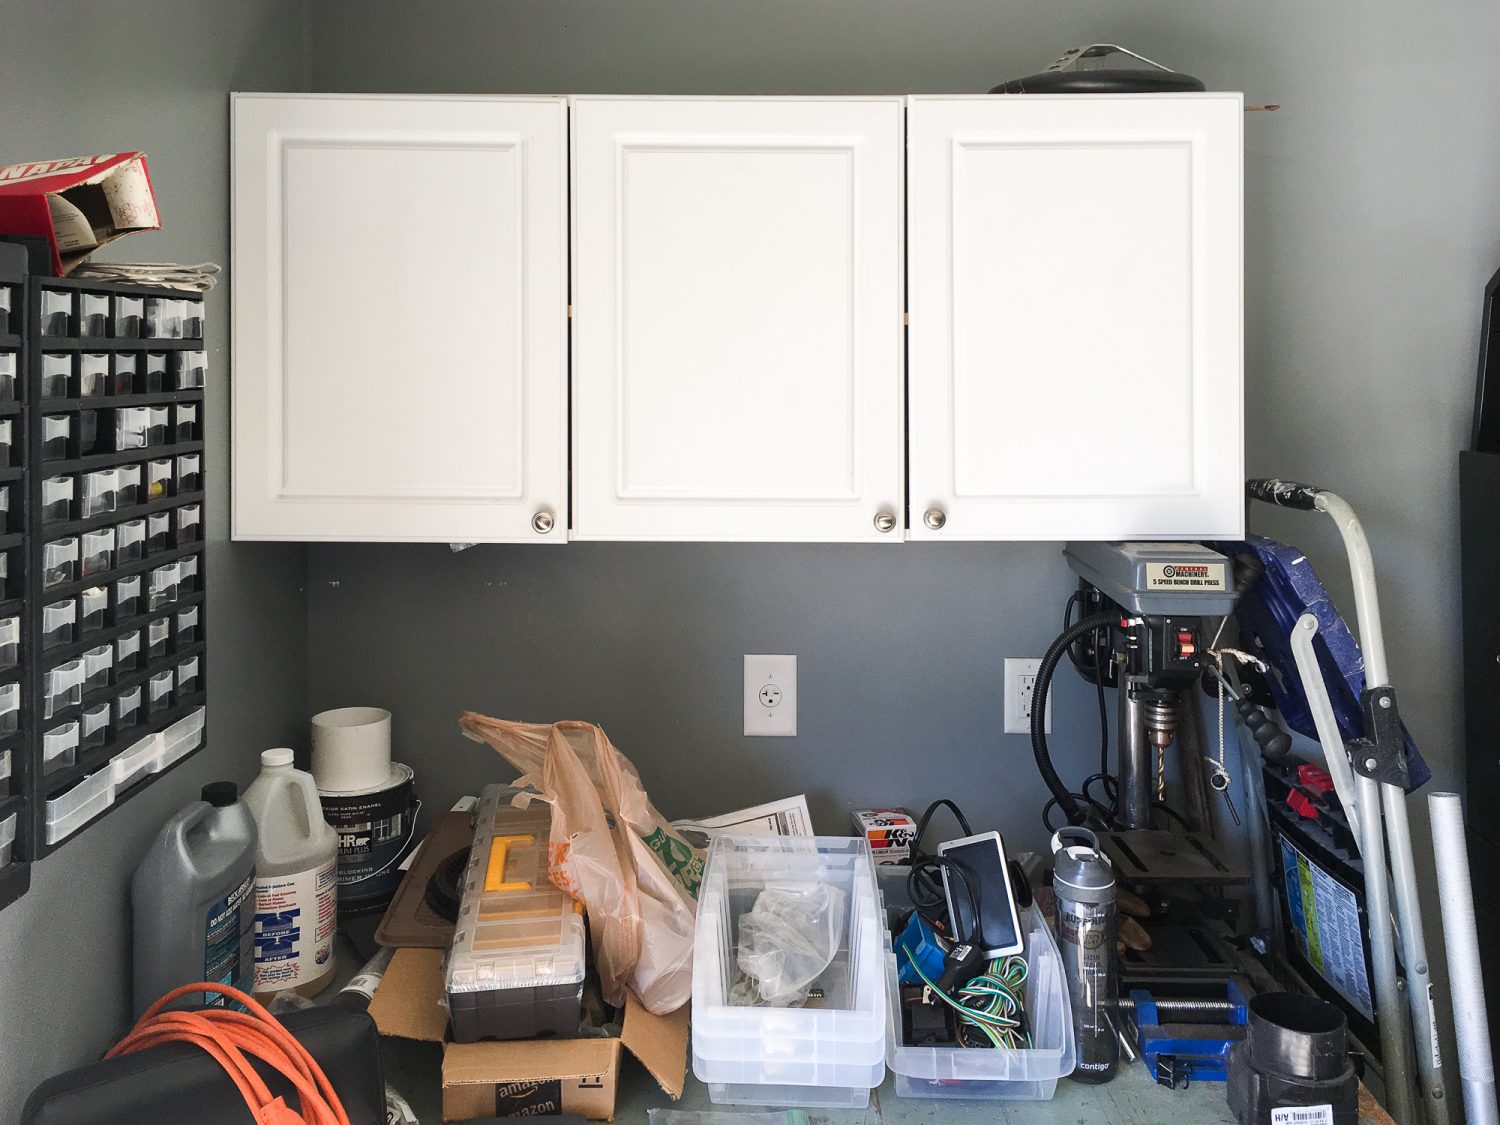 my old garage cabinets